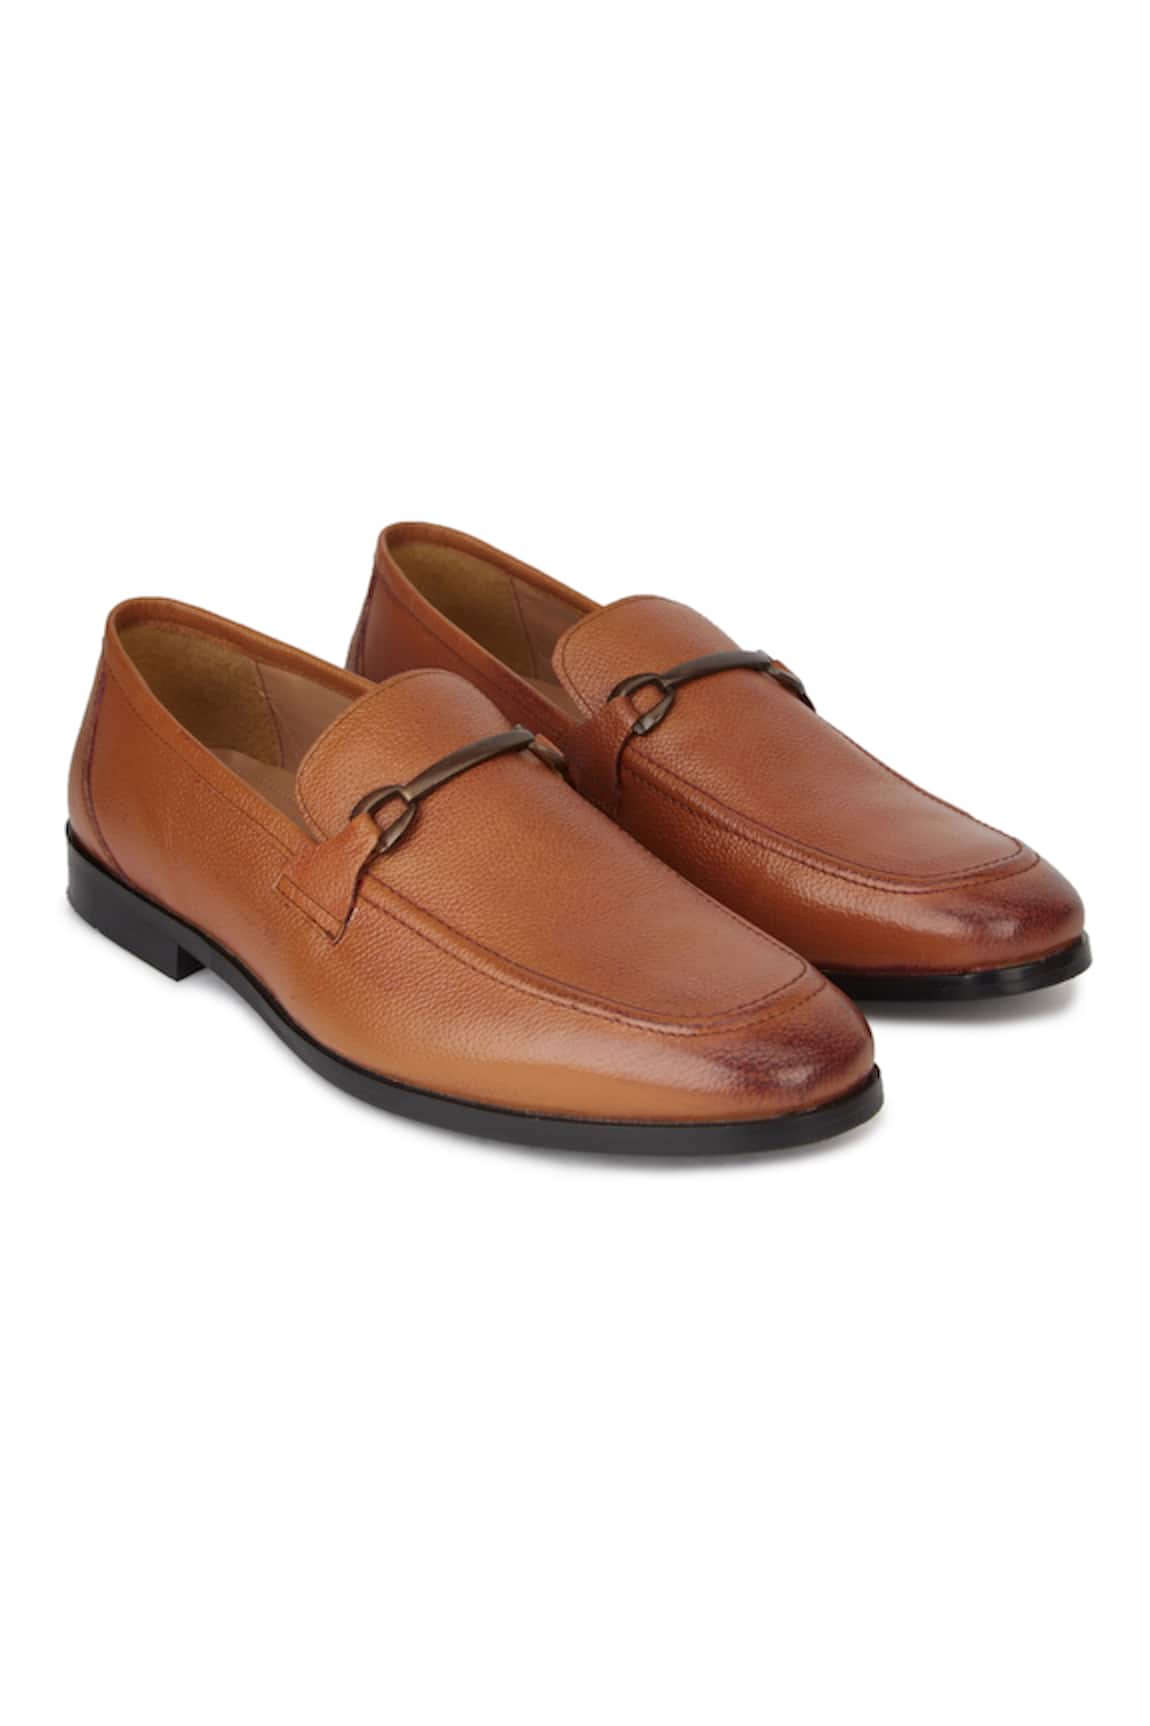 Hats Off Accessories Textured Genuine Leather Buckle Loafers